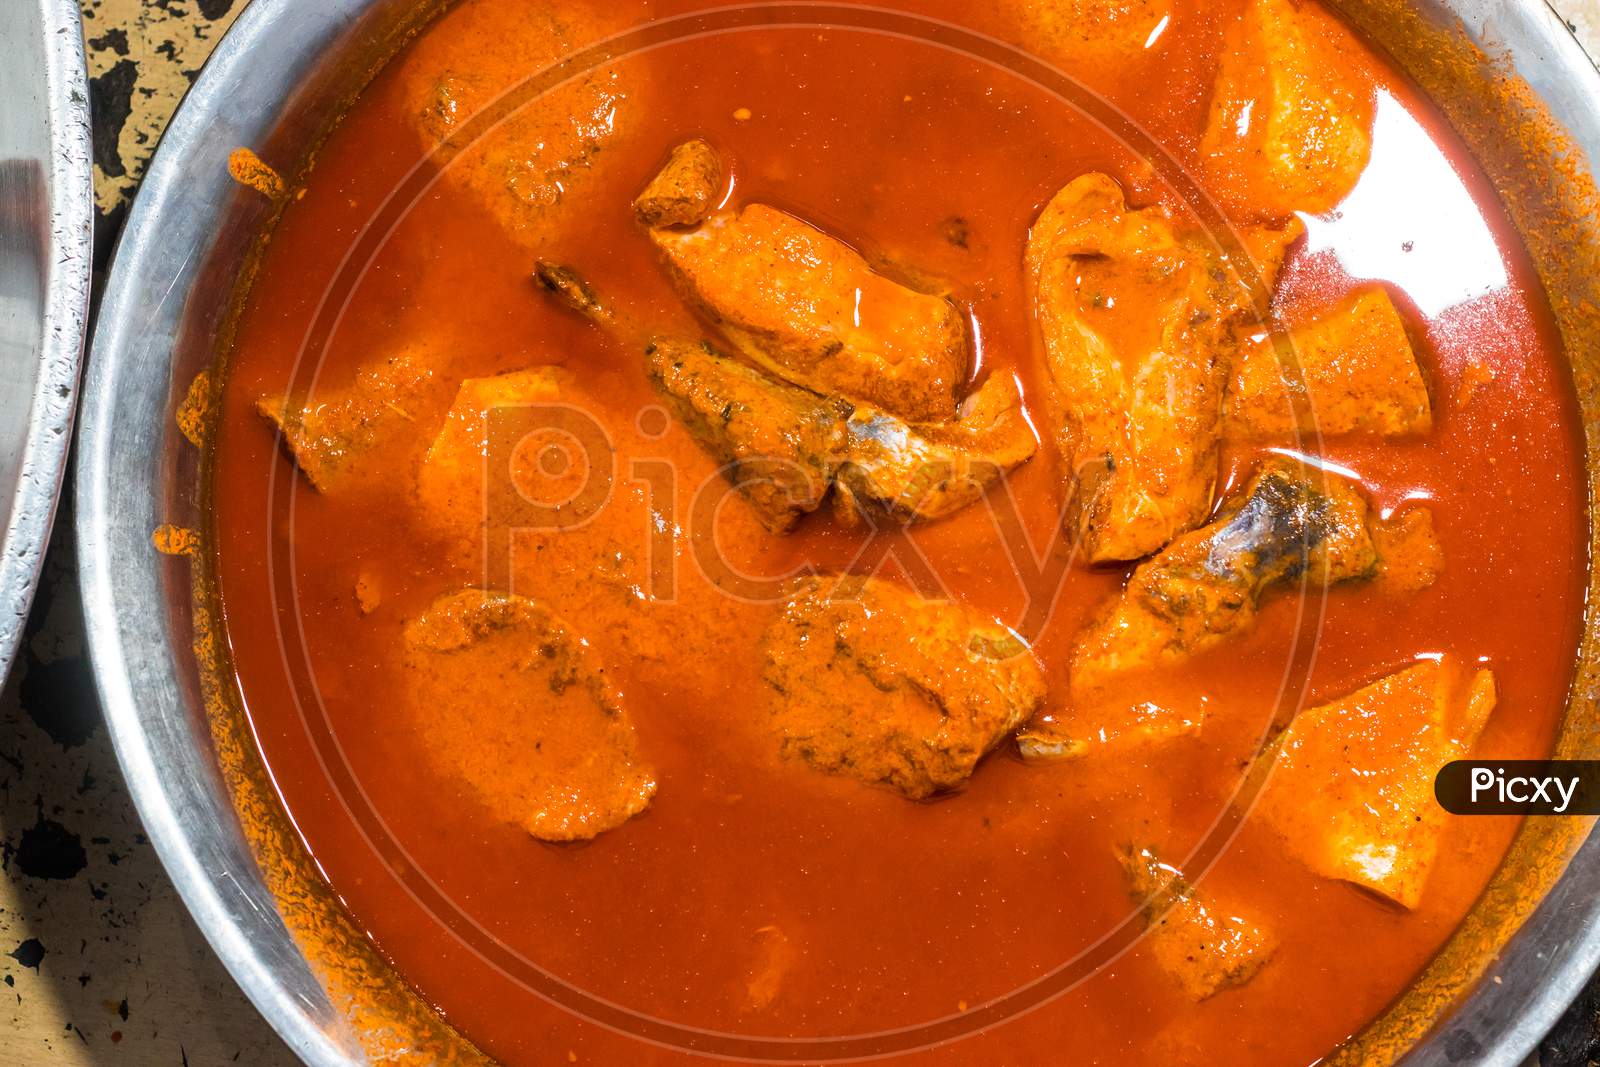 Indian Style Roasted Chicken Or Tandoori Chicken With Spicy Delicious Gravy, Indian Non Vegetarian Food. - Image